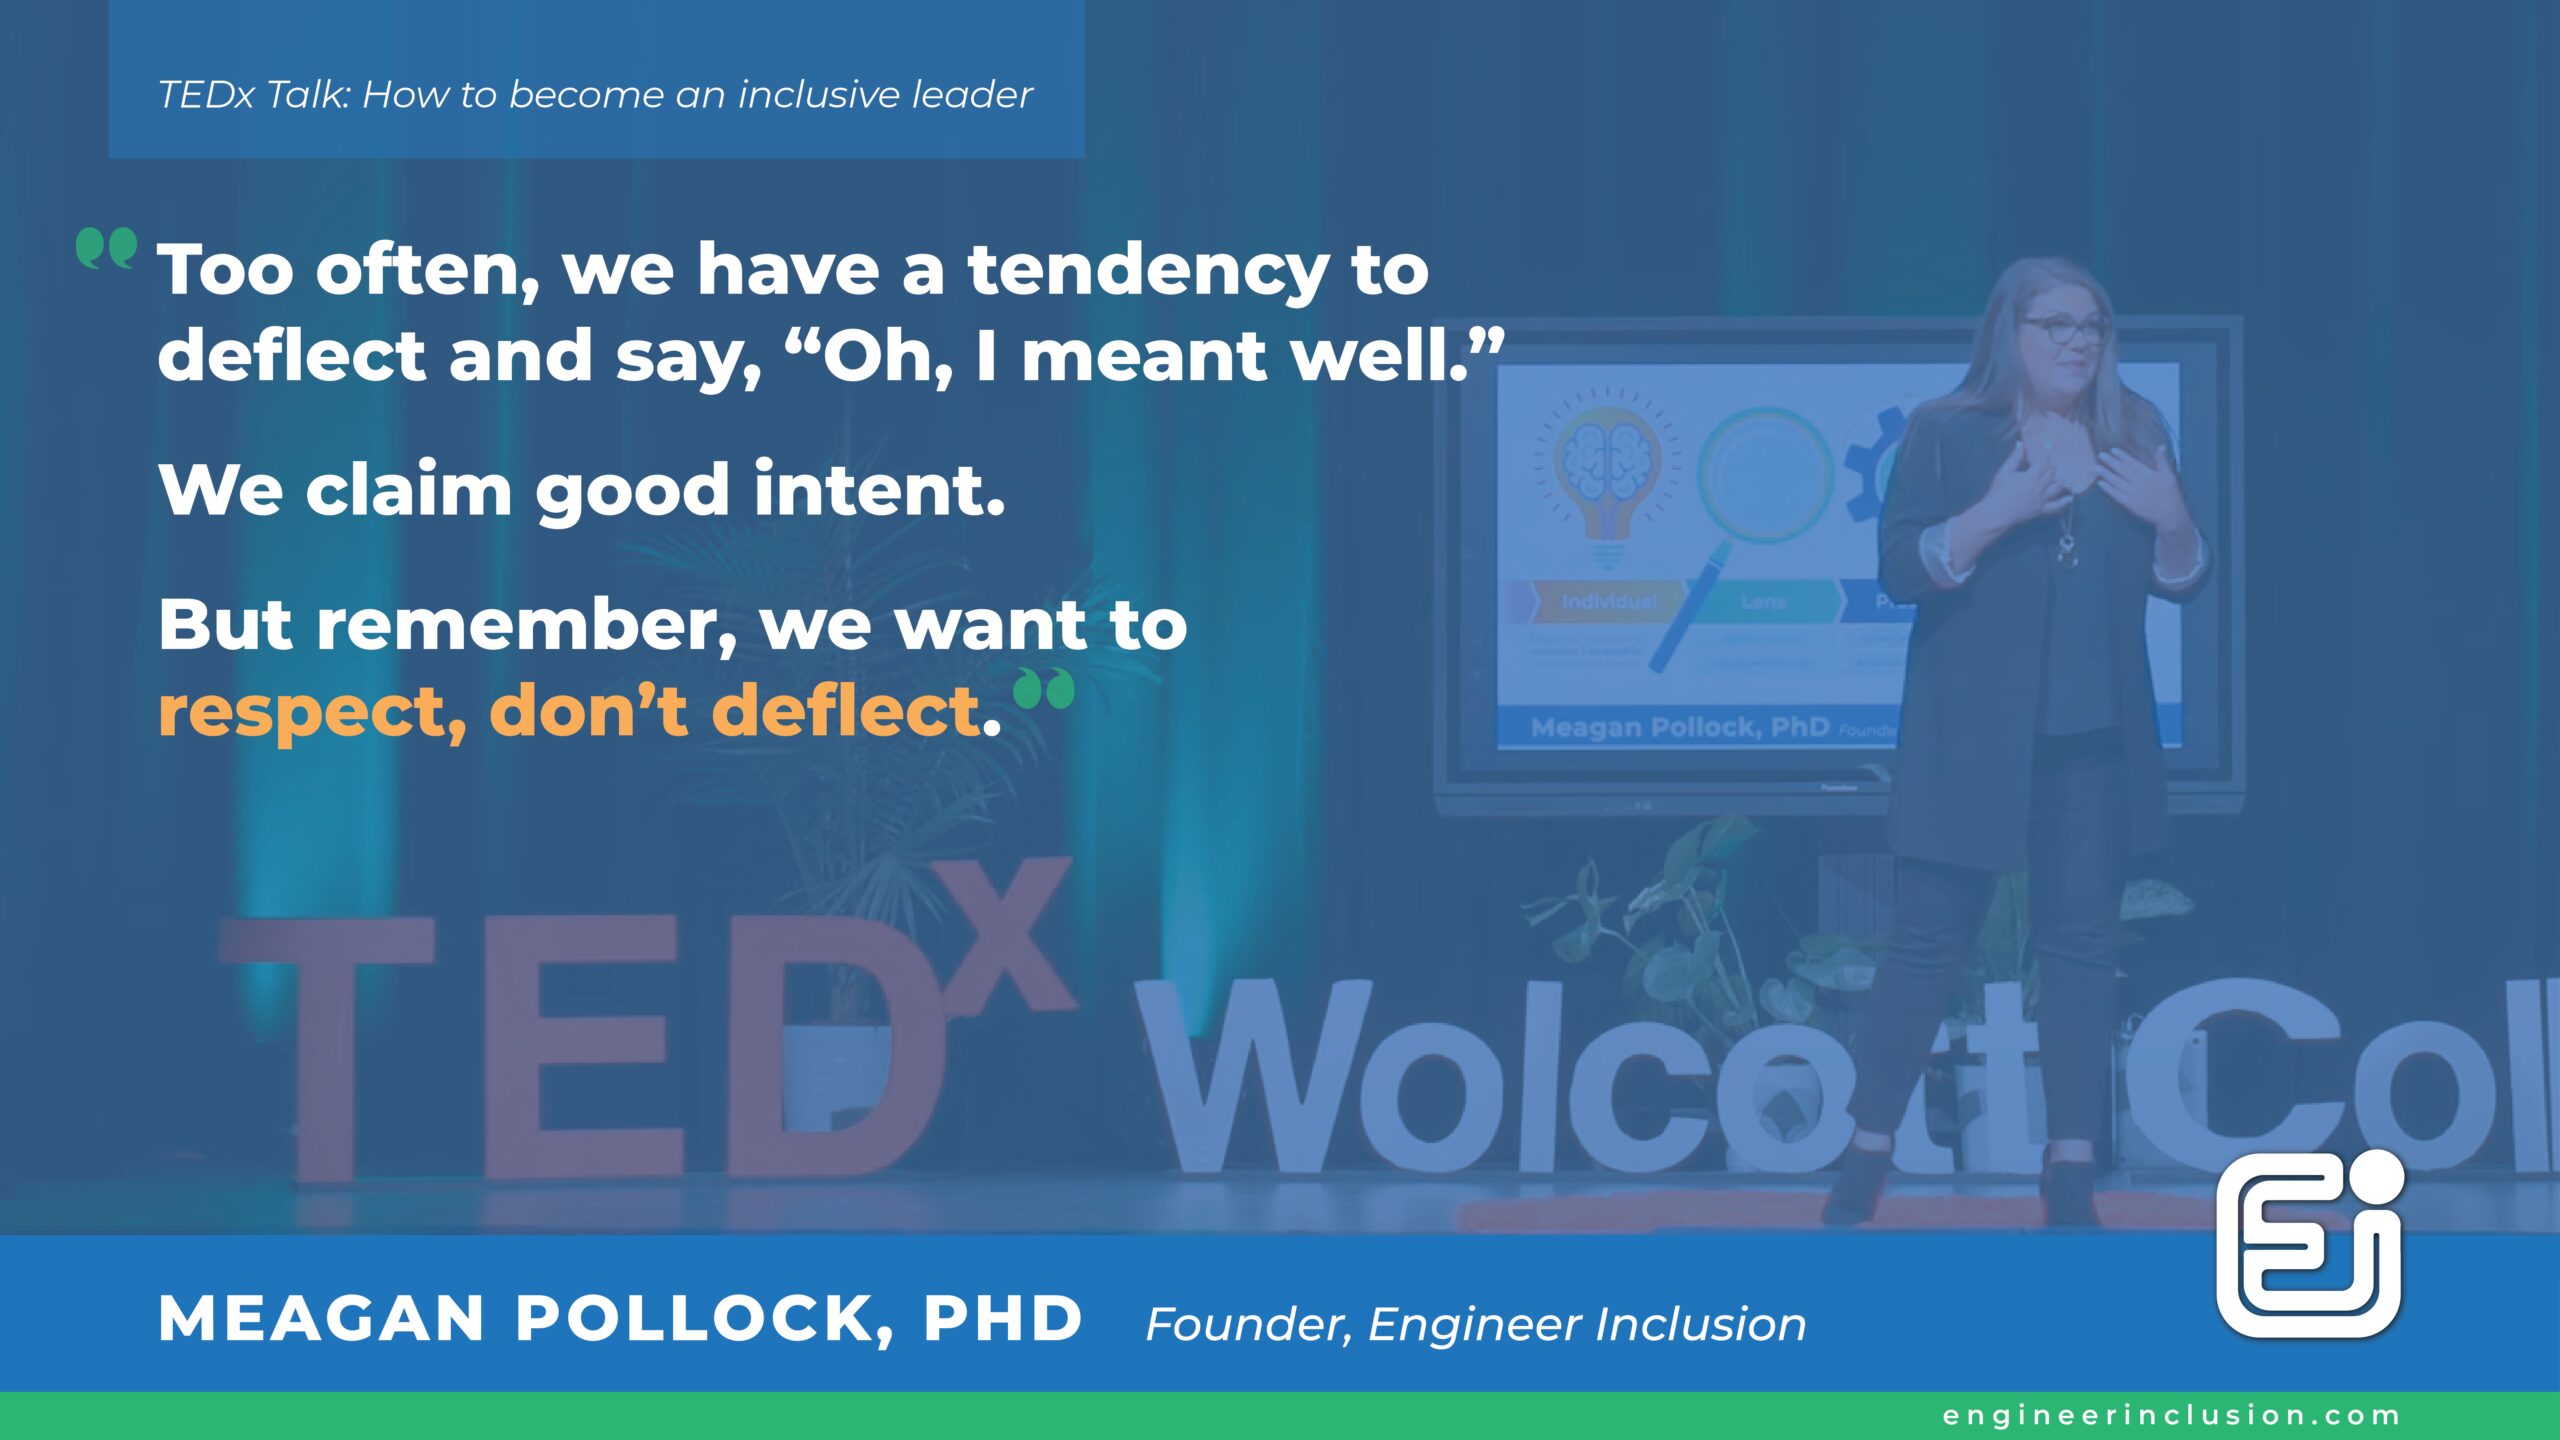 Too often, we have a tendency to deflect and say, “Oh, I meant well.” We claim good intent. But remember, we want to respect, don’t deflect. Dr. Meagan Pollock